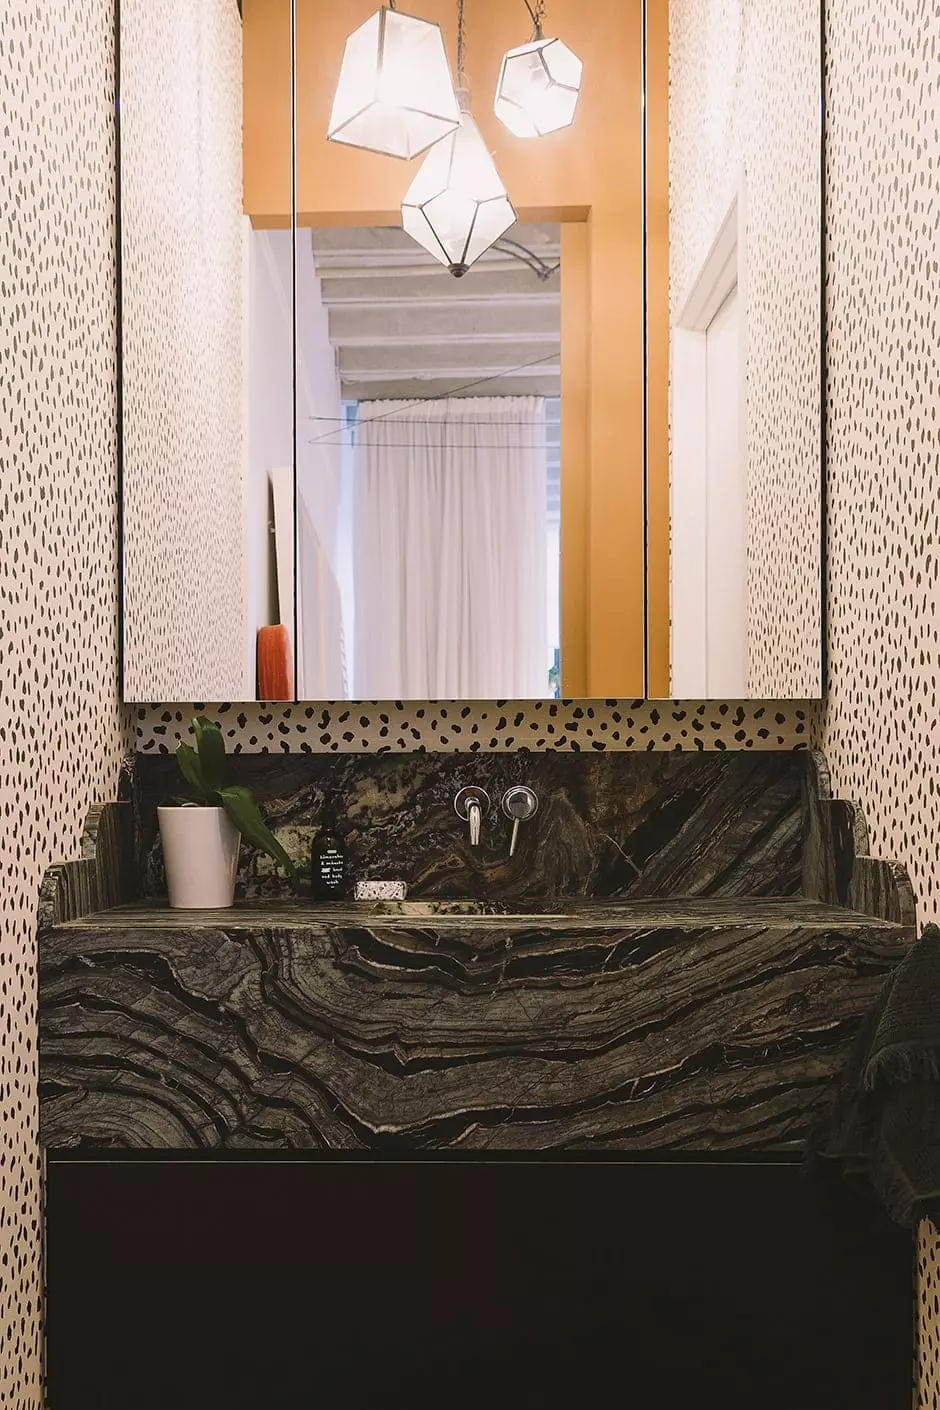 ABOVE Janice designed this shaped vanity then had it made in Silver Brown Wave marble by Italian Stone. The mirrored cabinetry and wall-to-wall drawers are another Mr & Mrs Ward creation. Wallpaper by Thibaut surrounds it all, lit by pendant lights picked up in Bali.